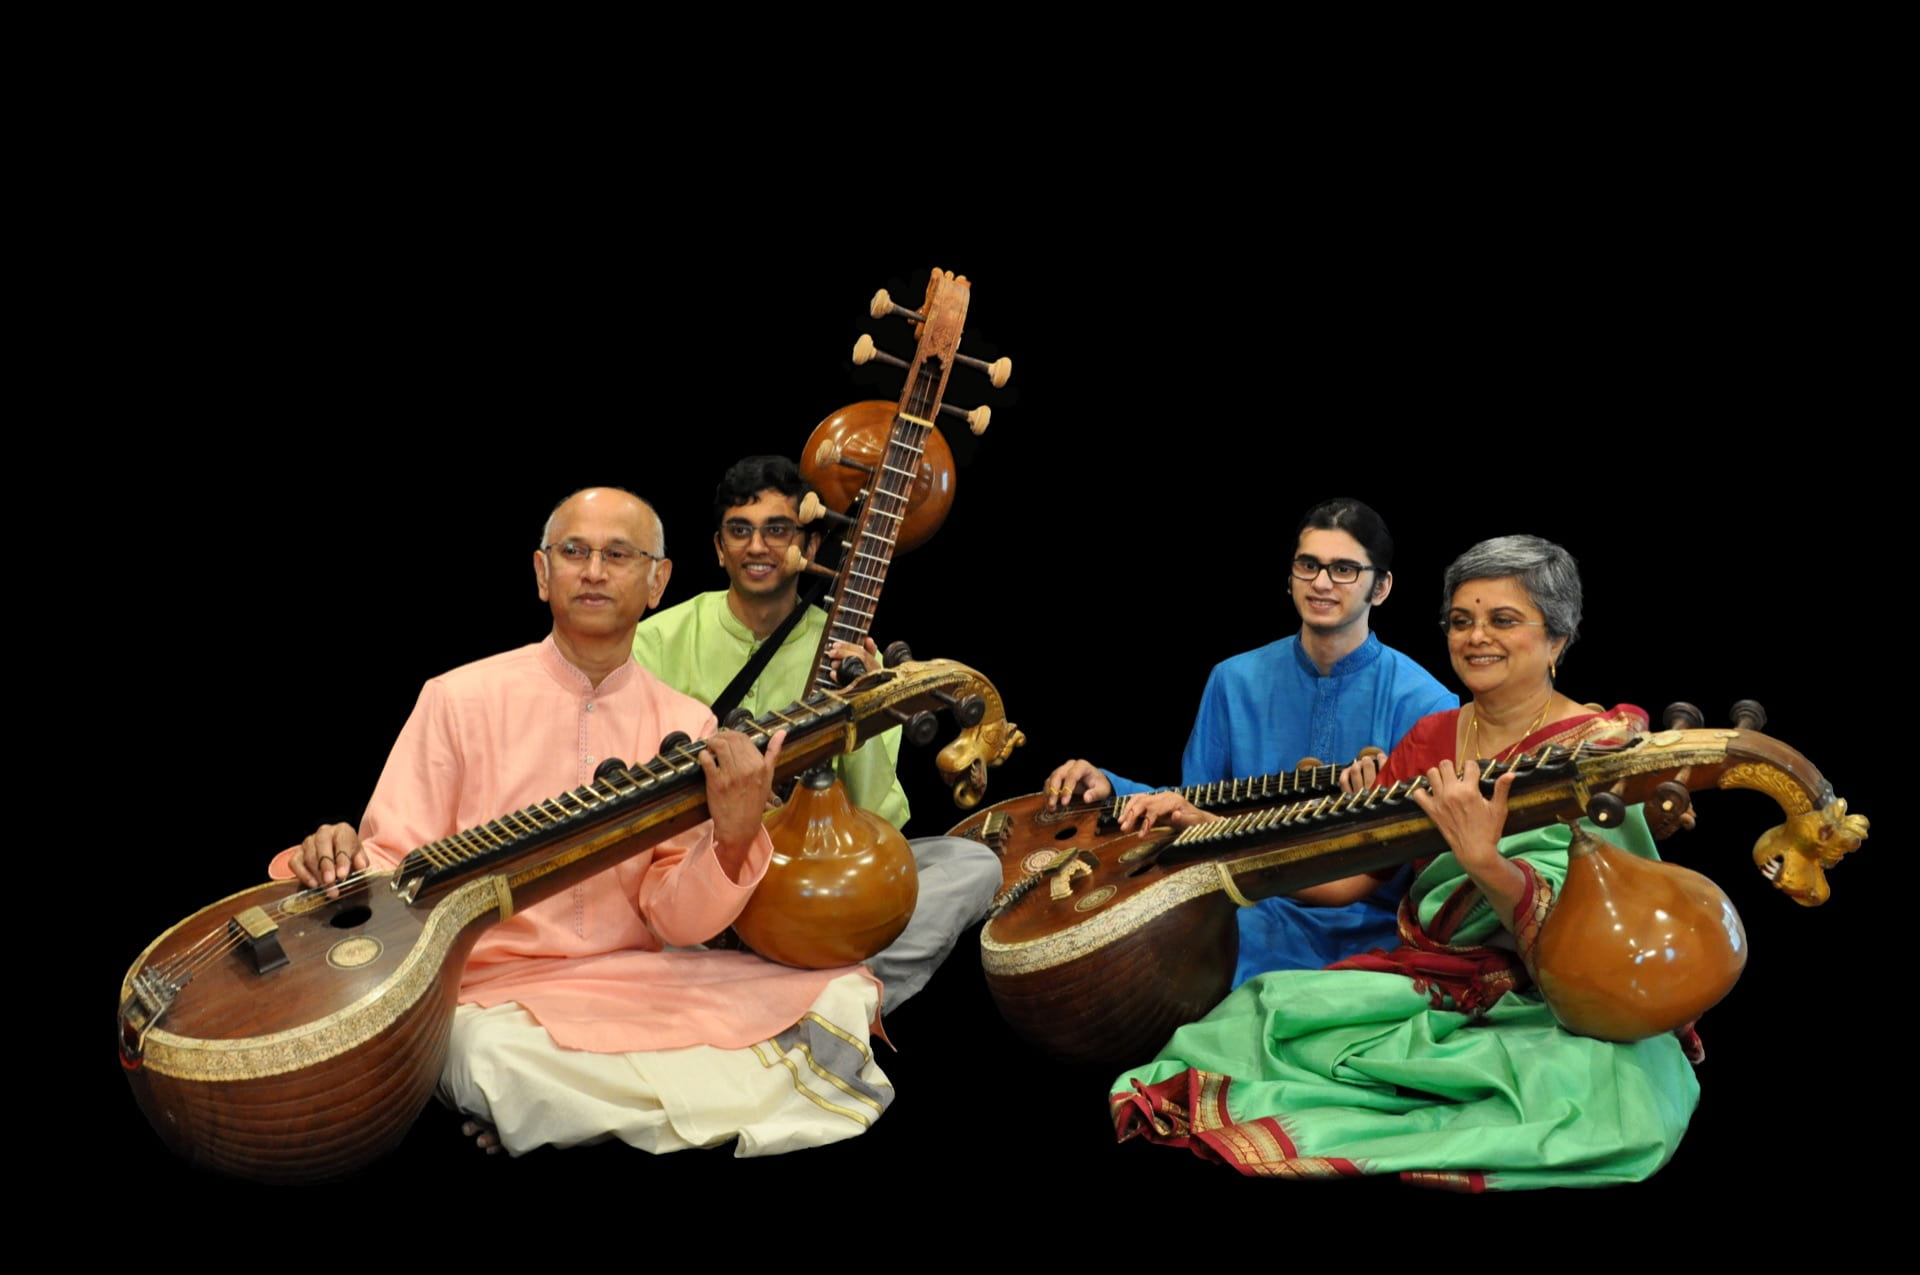 Sreevidhya Chandramouli with the Chandramoulis quartet. All four are seated with their instruments.